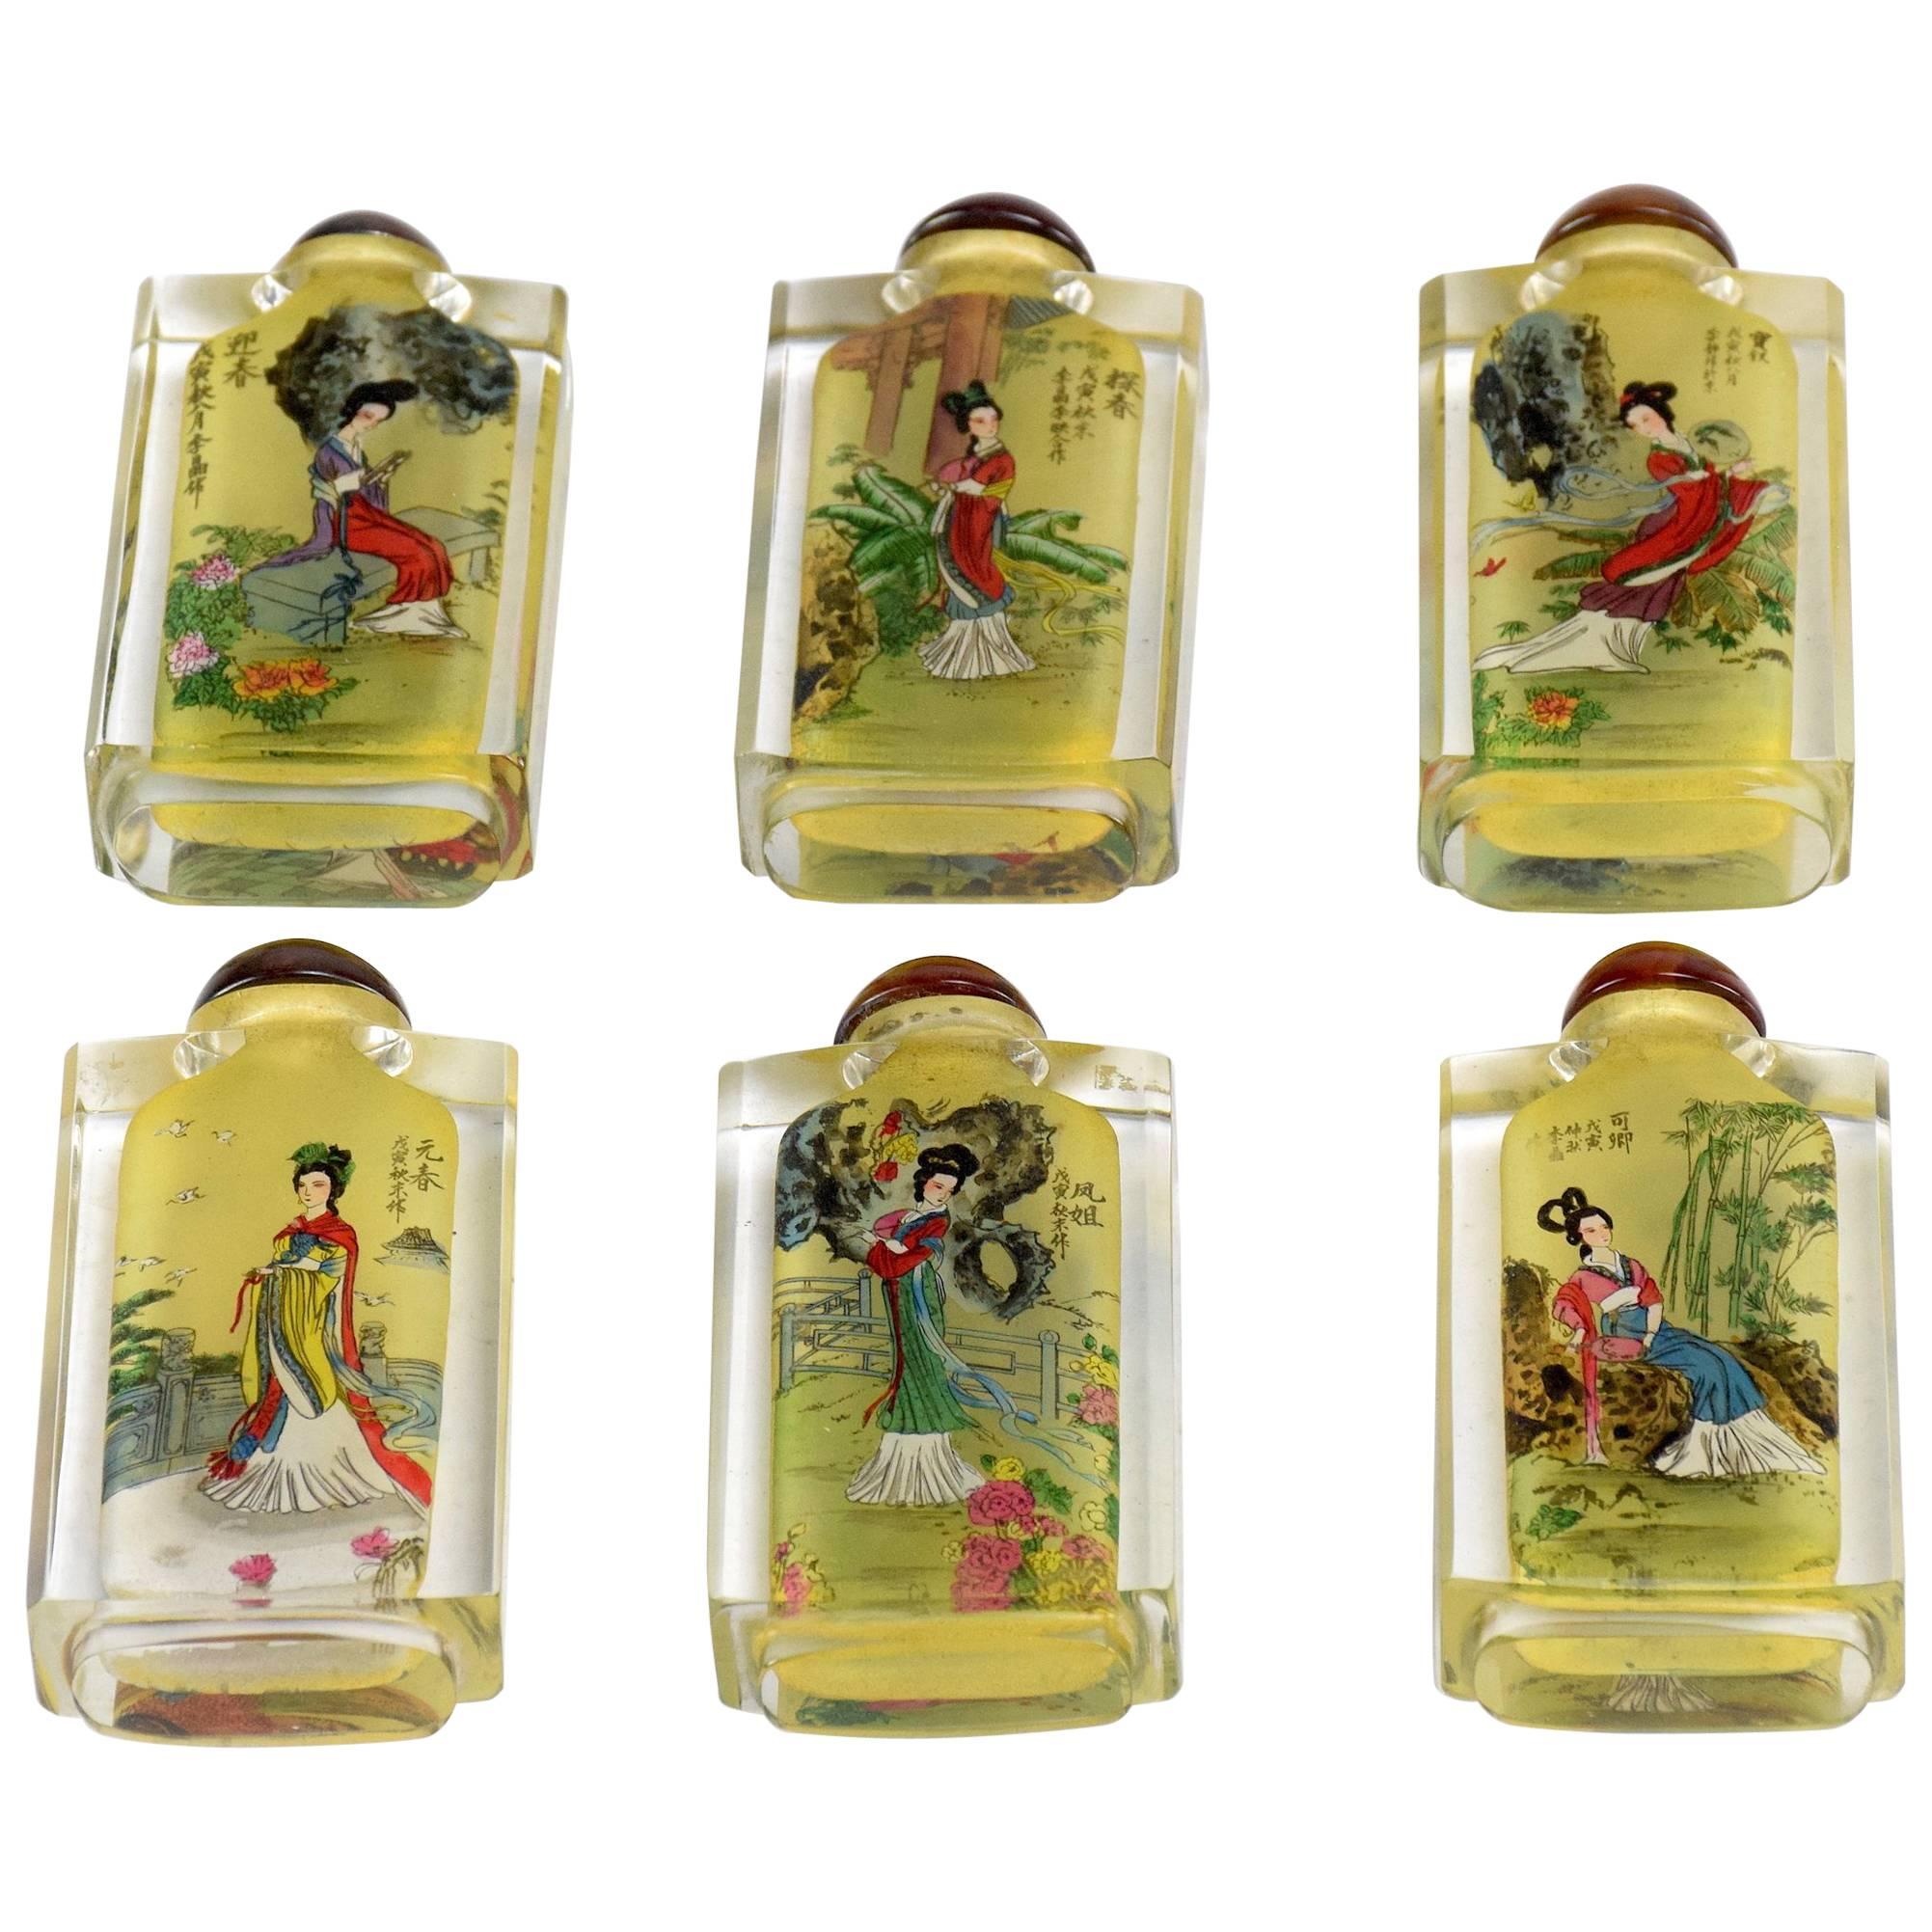 20th Century Chinese Hand-Painted on Crystal Snuff Bottles